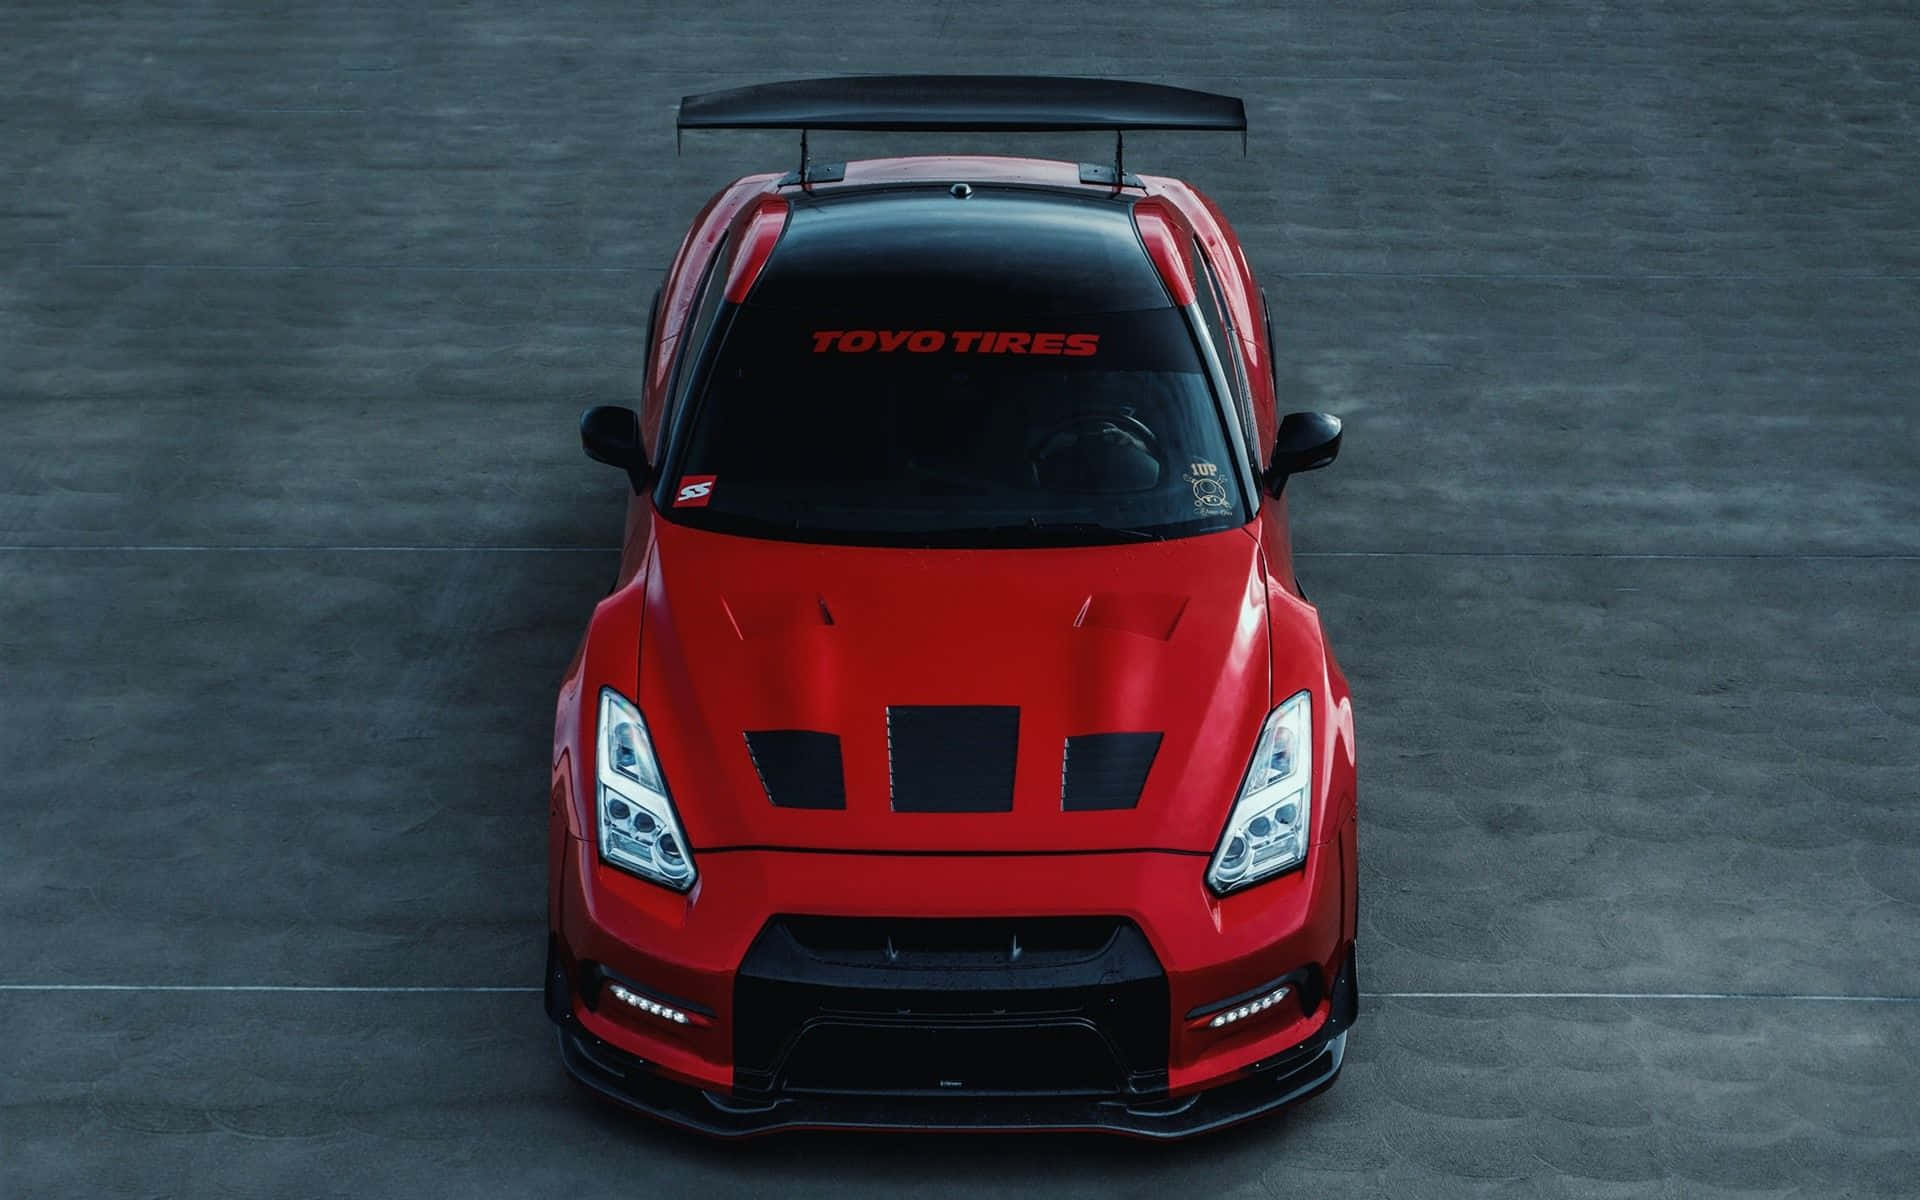 A Red Nissan Gtr - R - Is Shown In The Sky Wallpaper